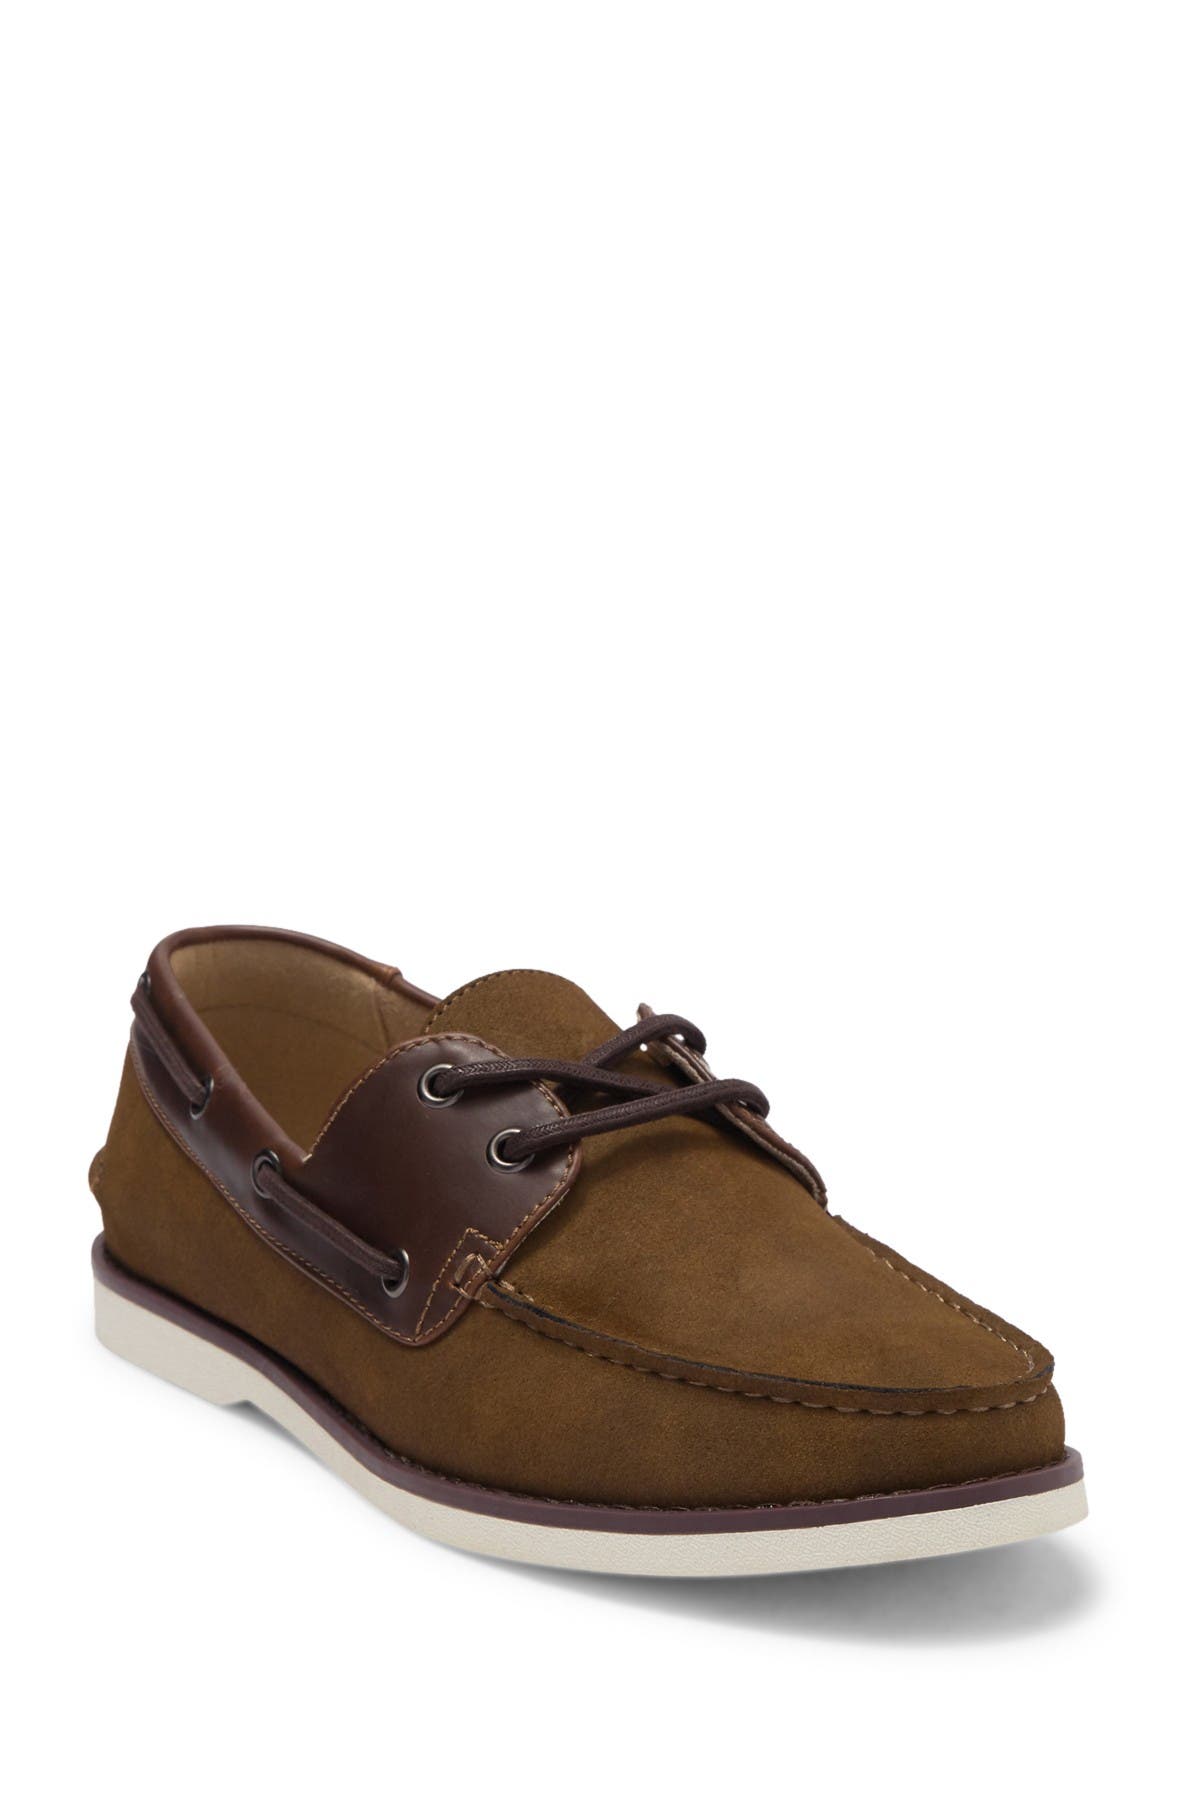 kenneth cole unlisted boat shoes